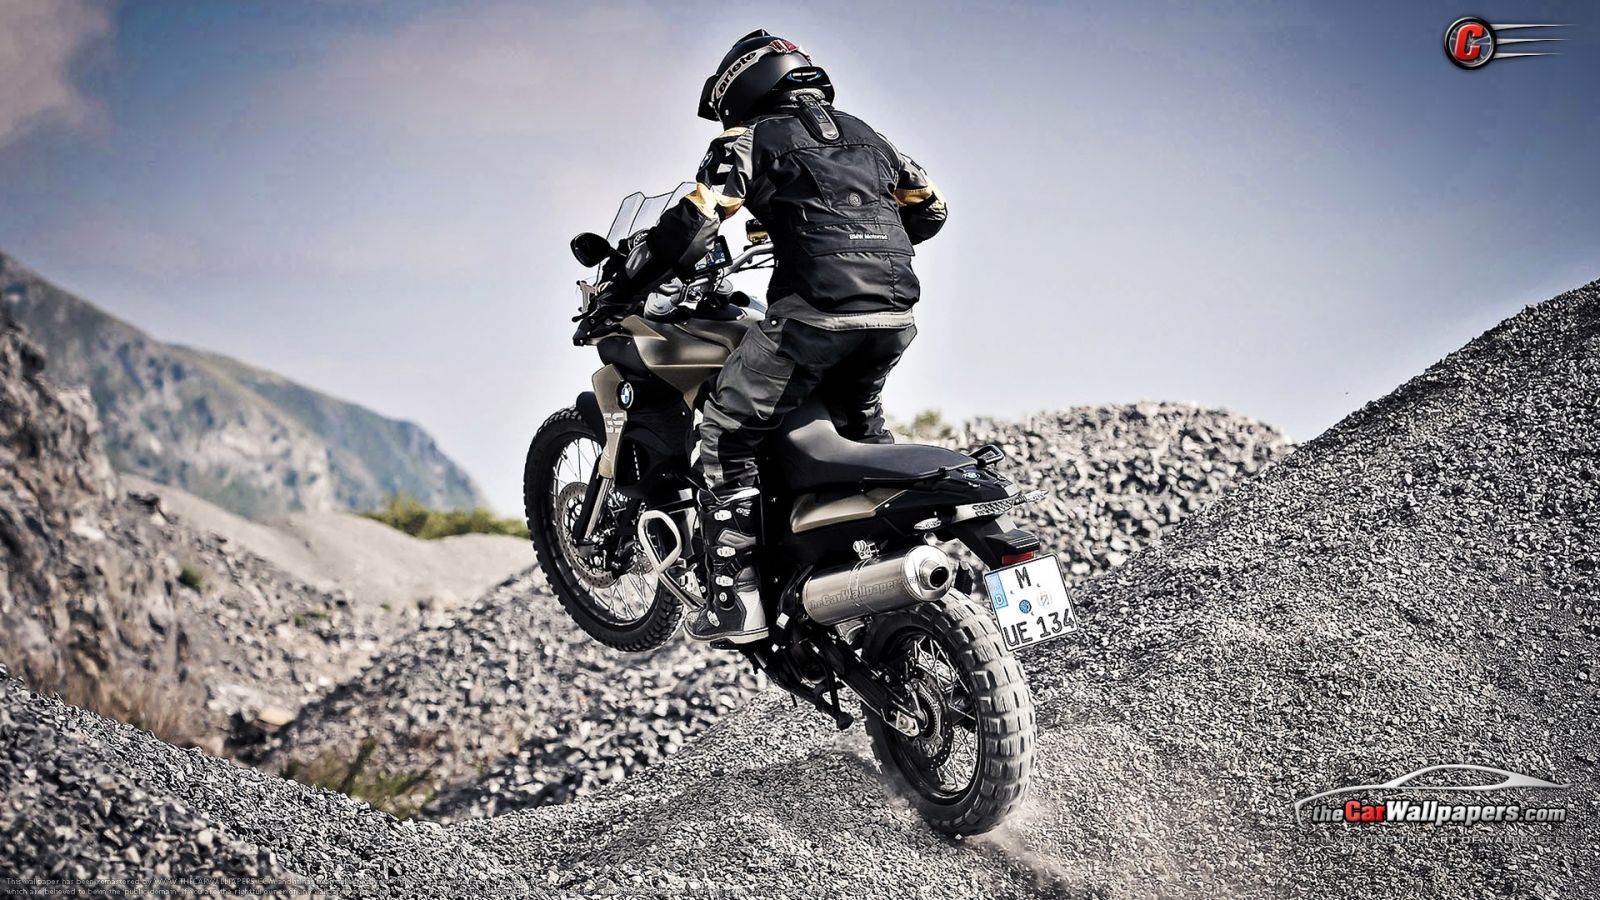 2013 Bmw f800gs motorcycle 1920x1080